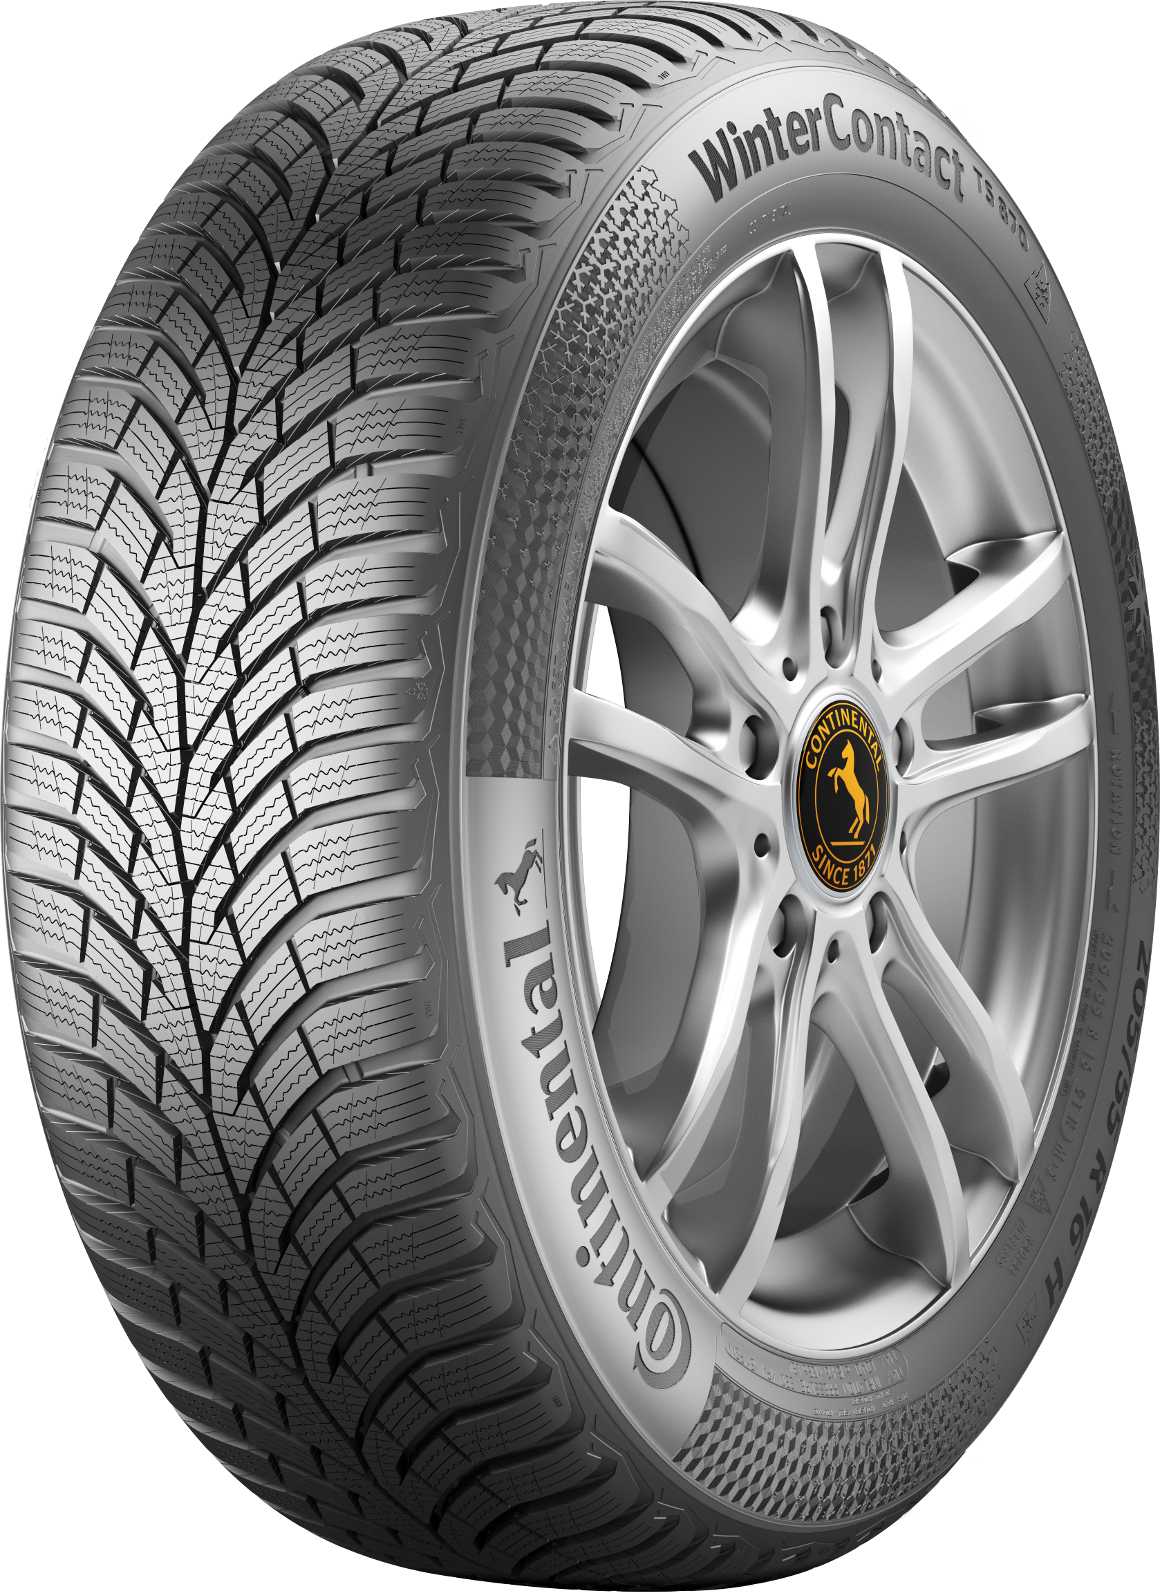    Continental Winter Contact TS870 205/55 R16 